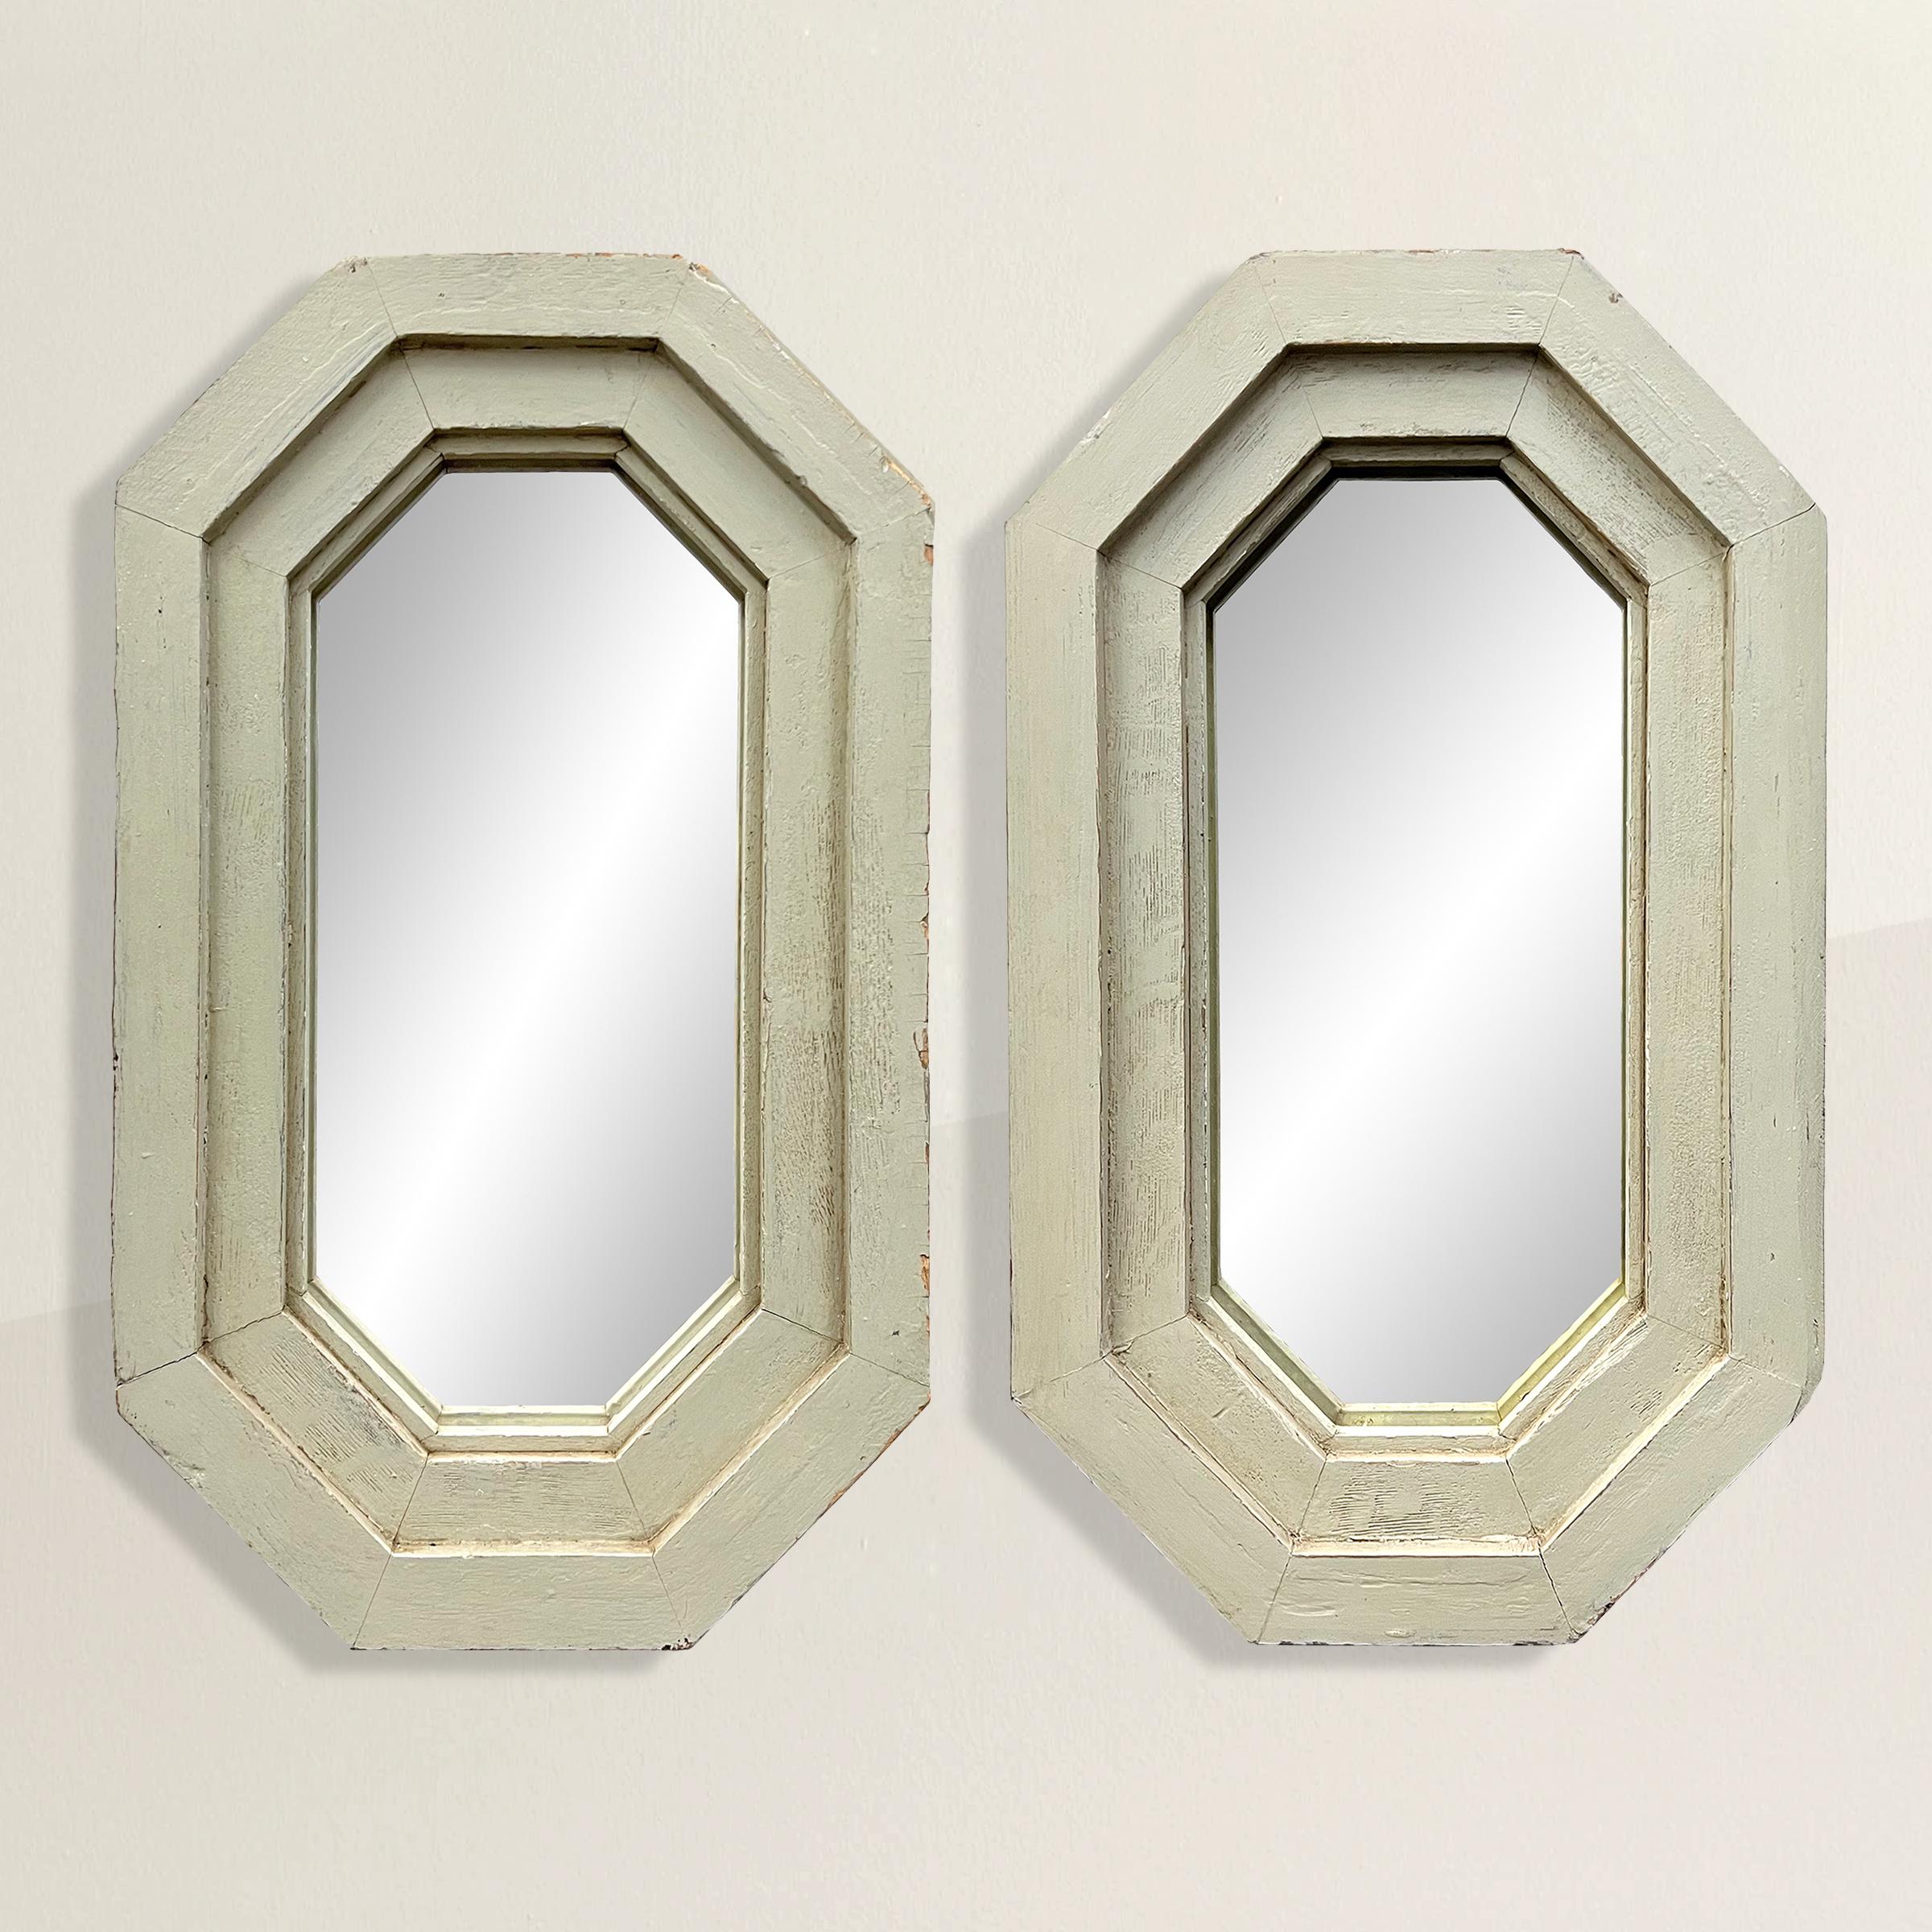 A chic pair of quirky and classical-inspired early 20th century American octagonal framed mirrored with a wonderful sage green painted finish and antique mirrors. Perfect over a pair of console tables or over a pair of bedside tables.